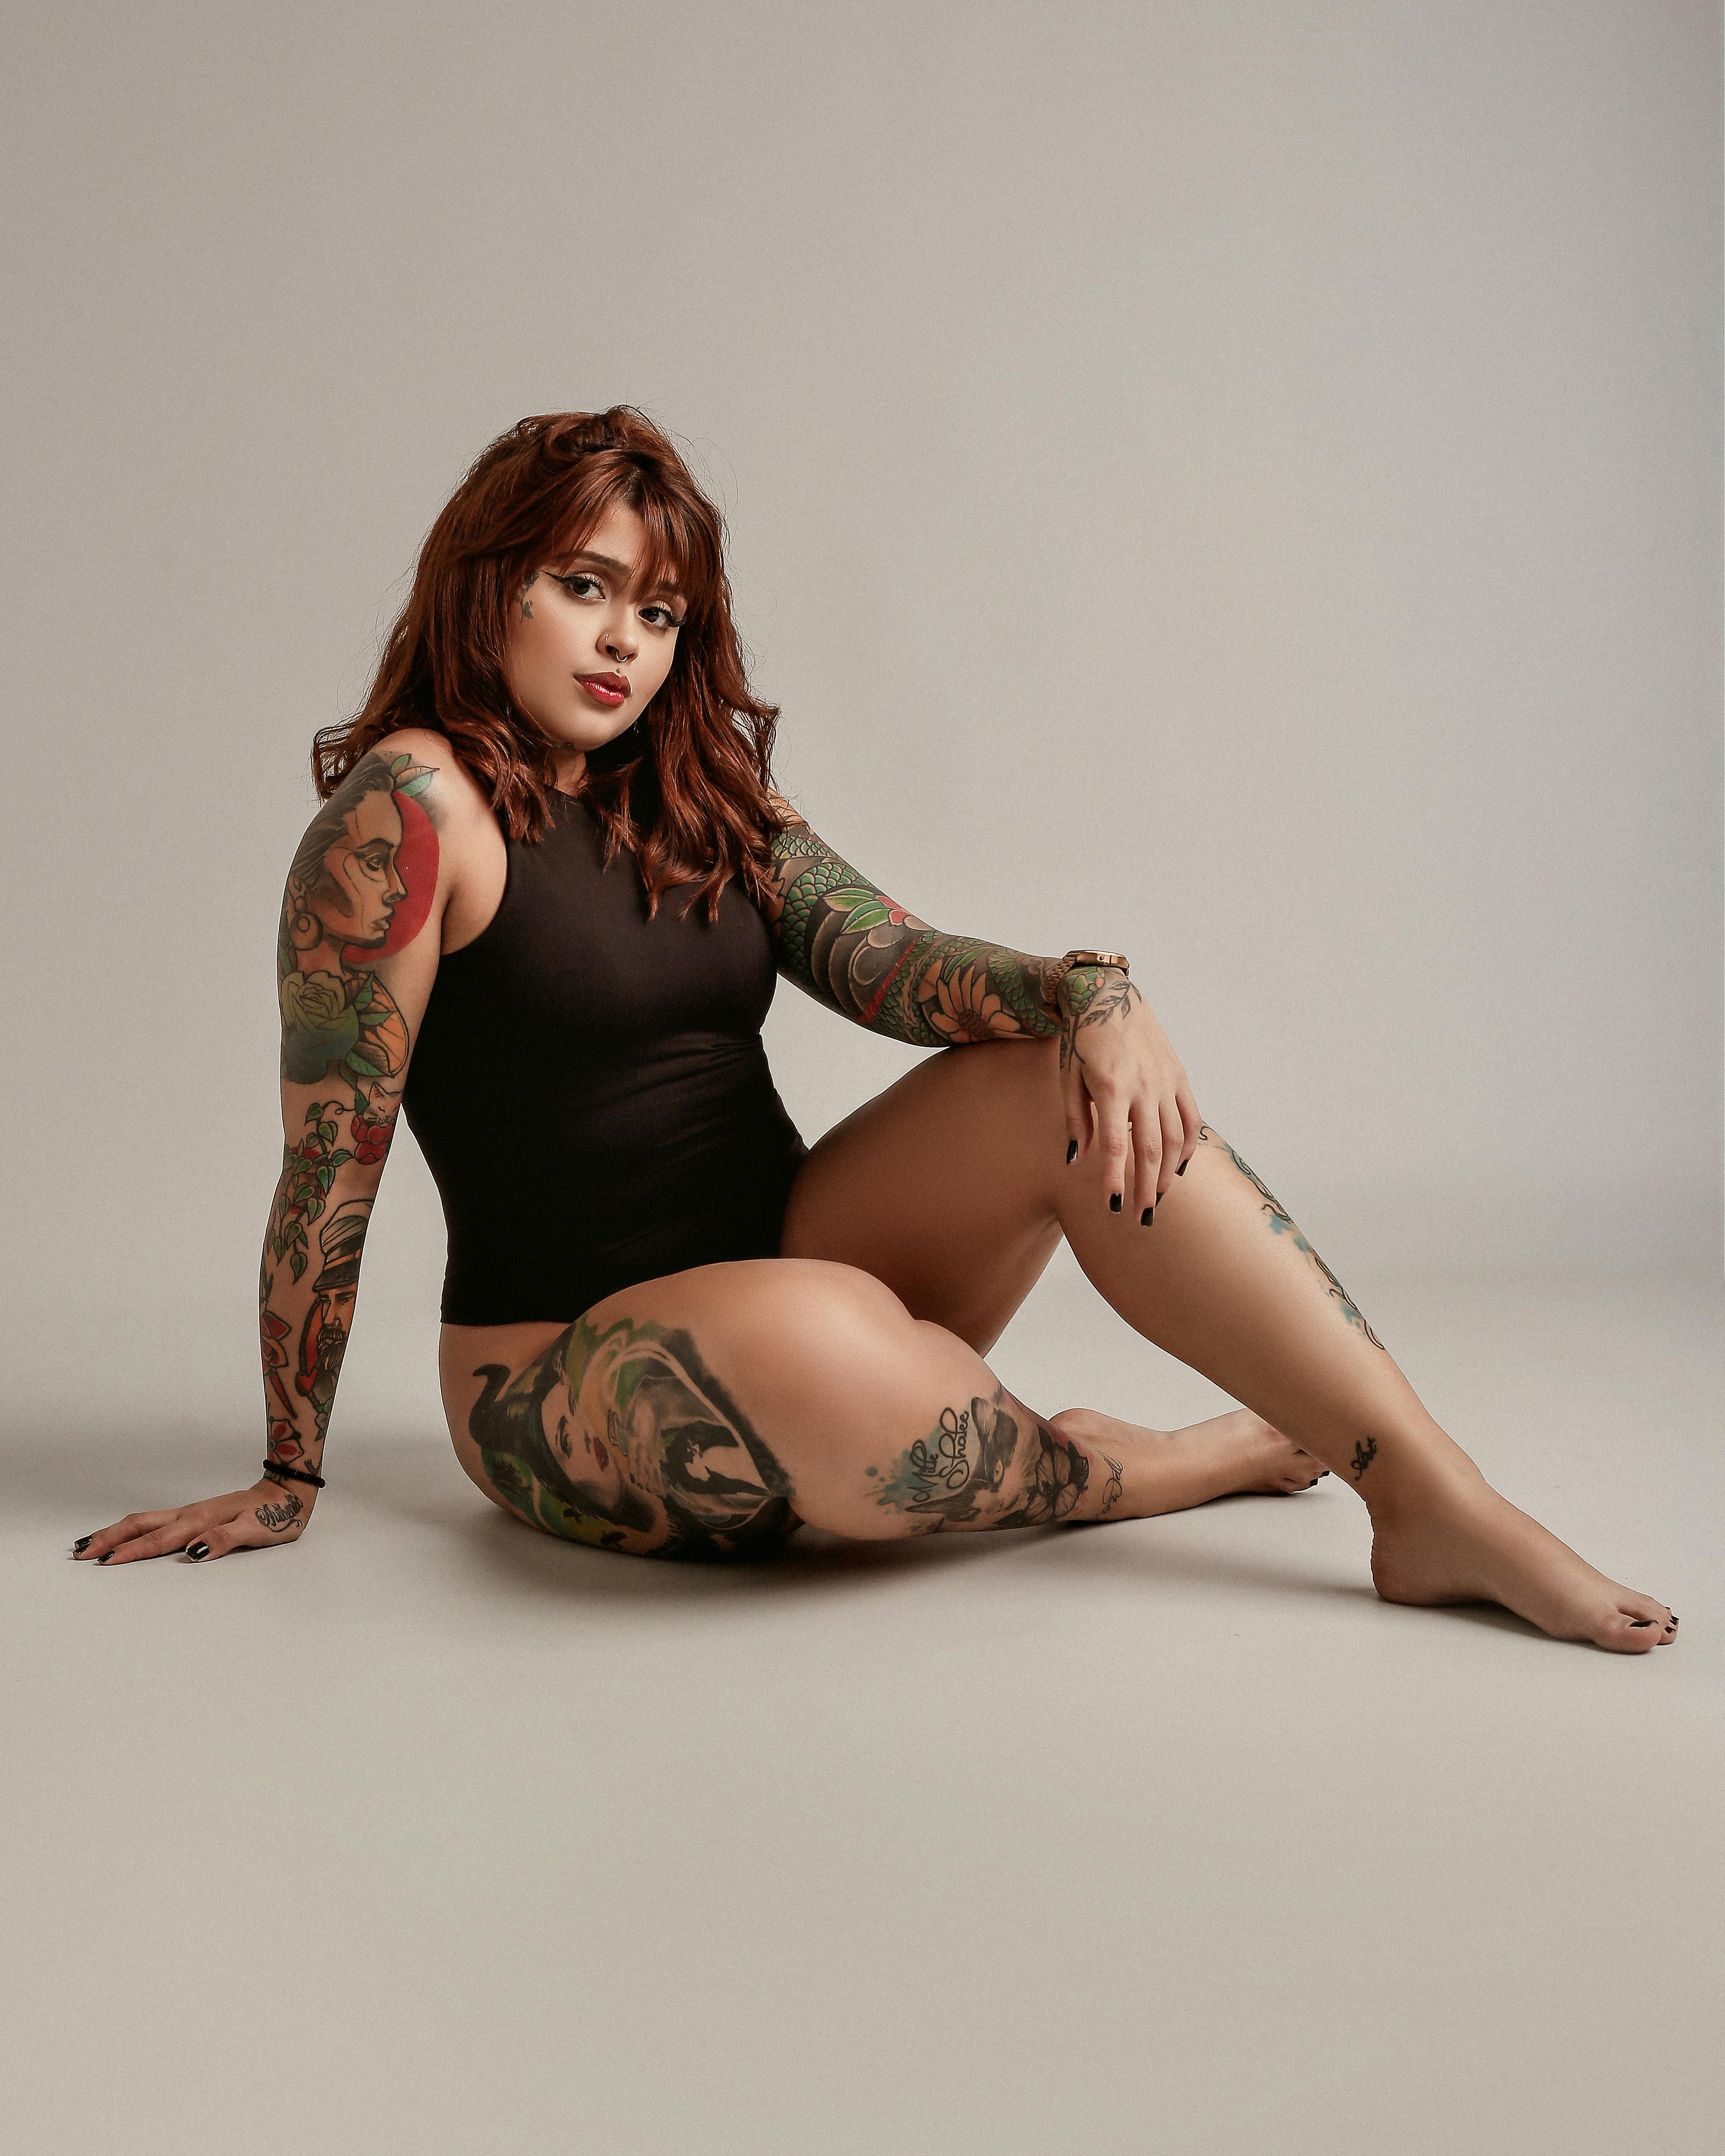 Model with Tattoos Posing in Bodysuit · Free Stock Photo